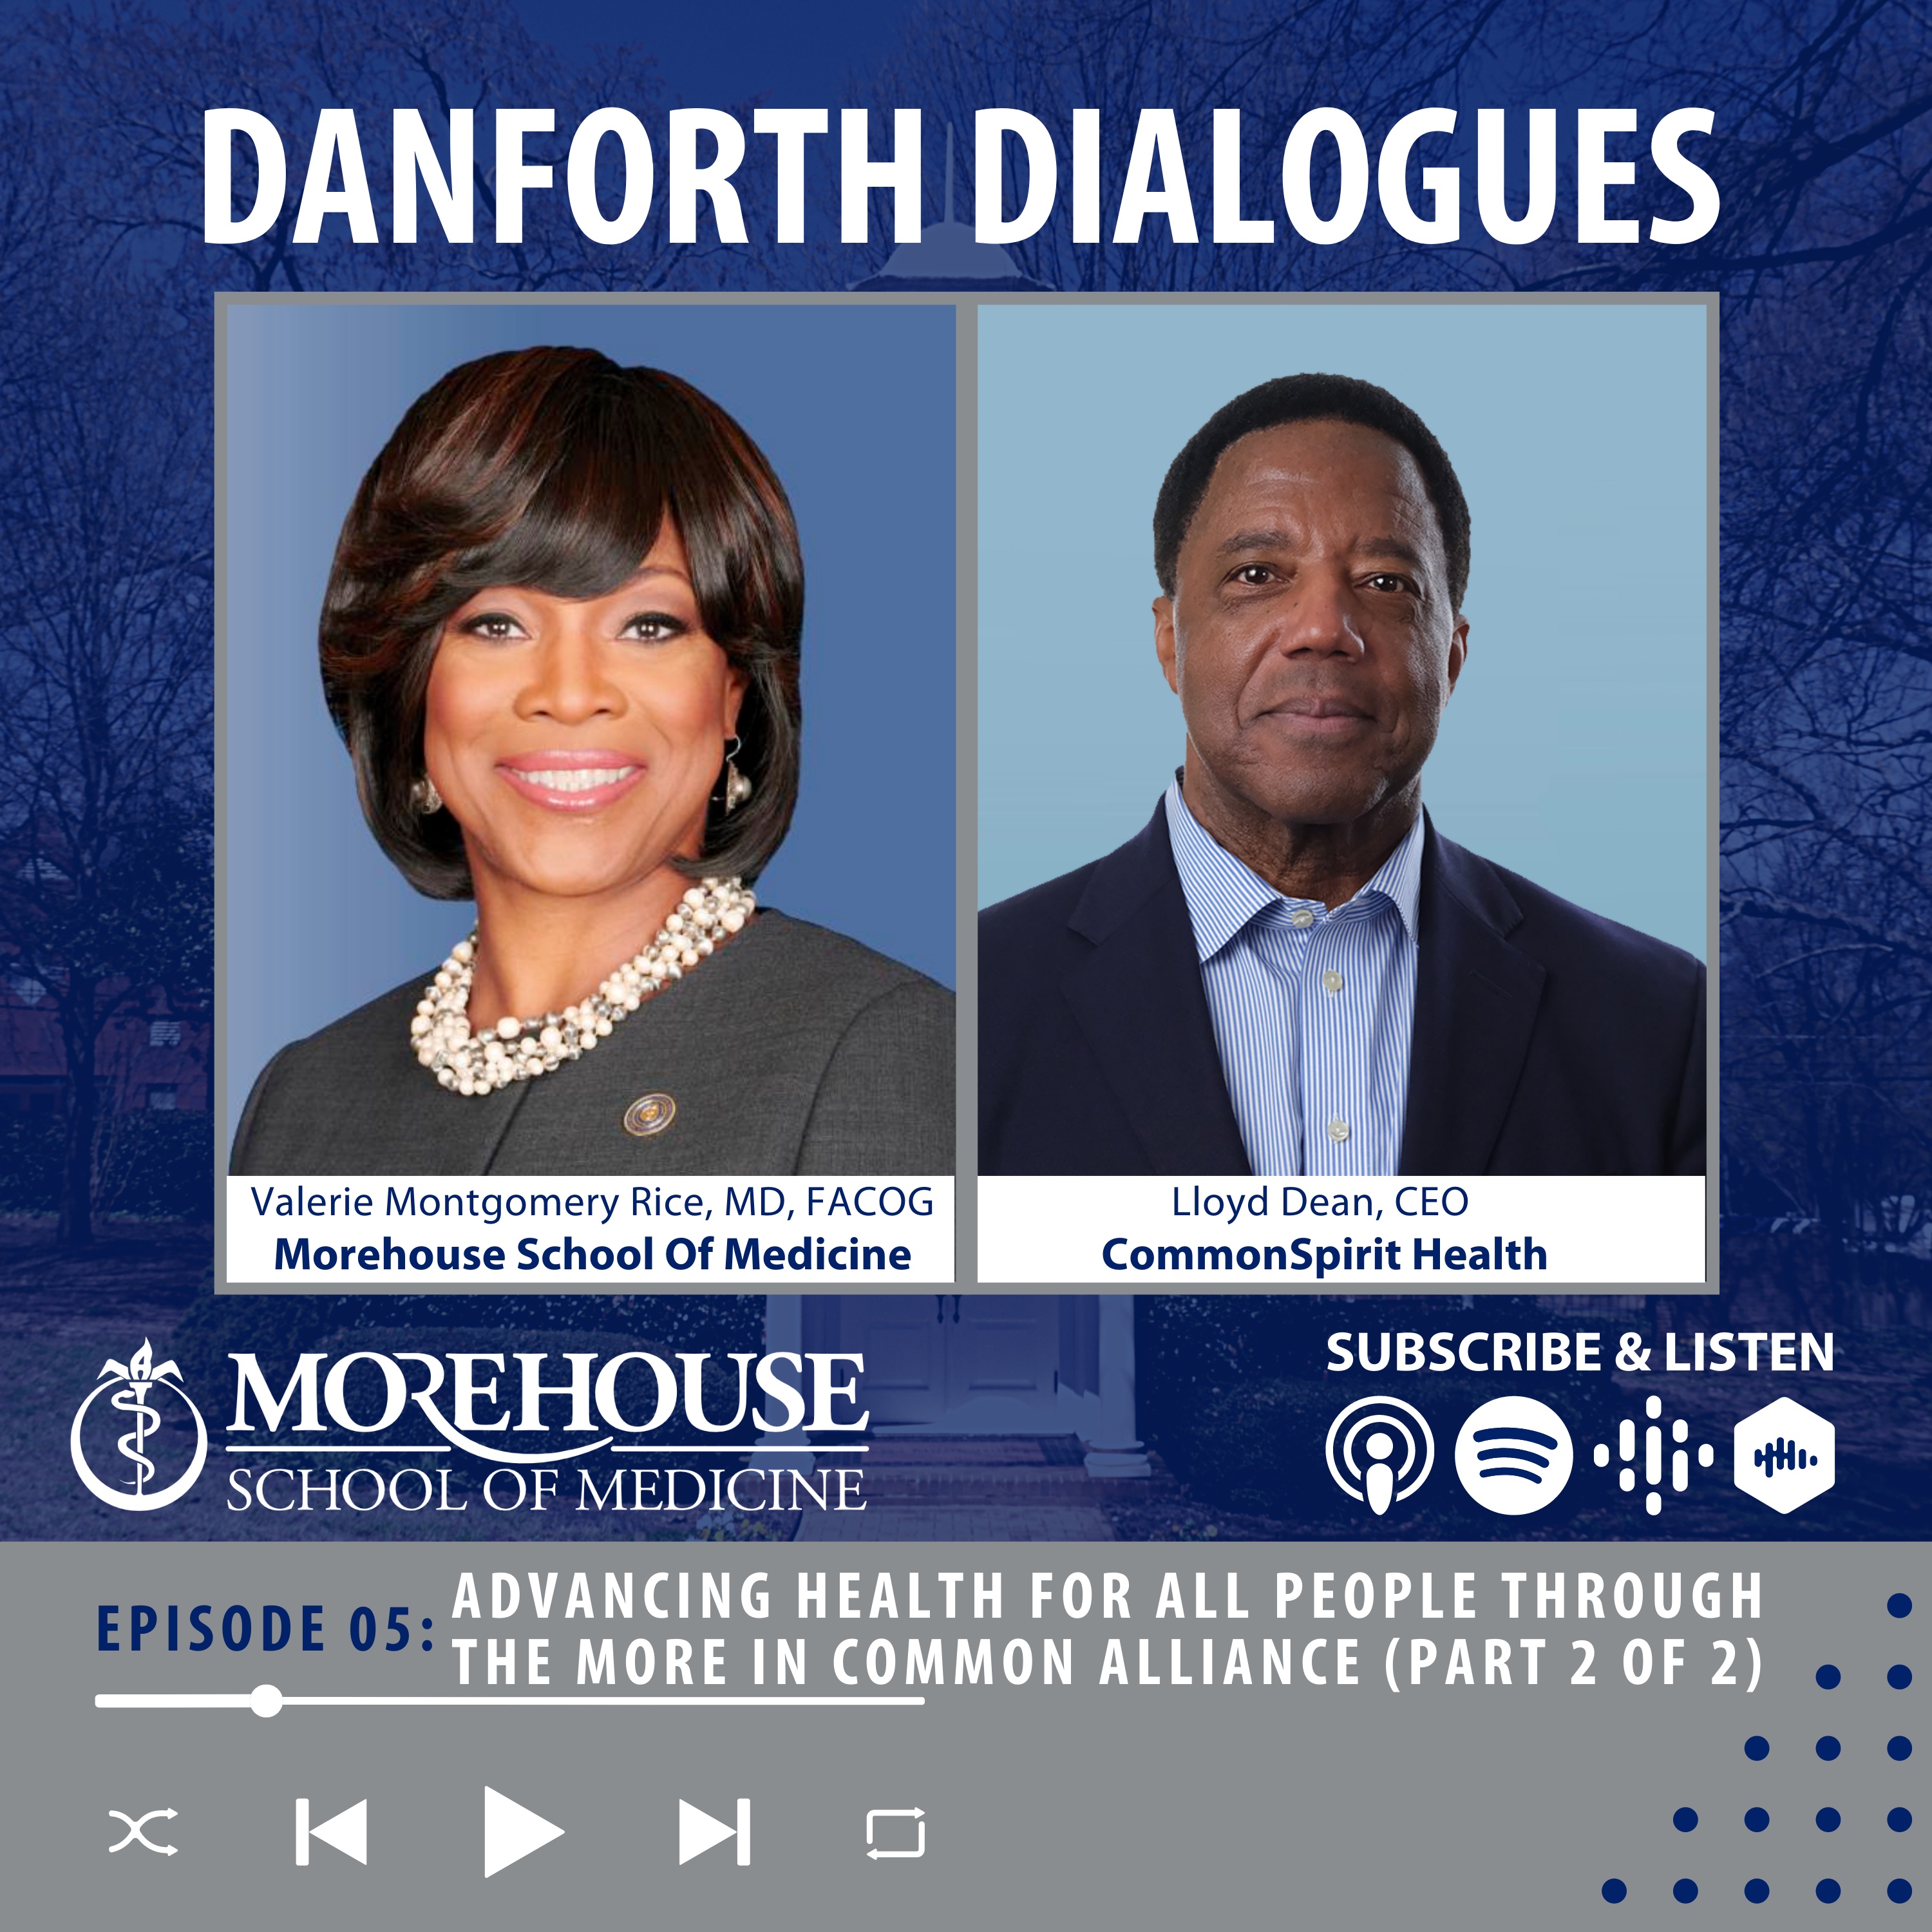 Danforth Dialogues with Lloyd Dean